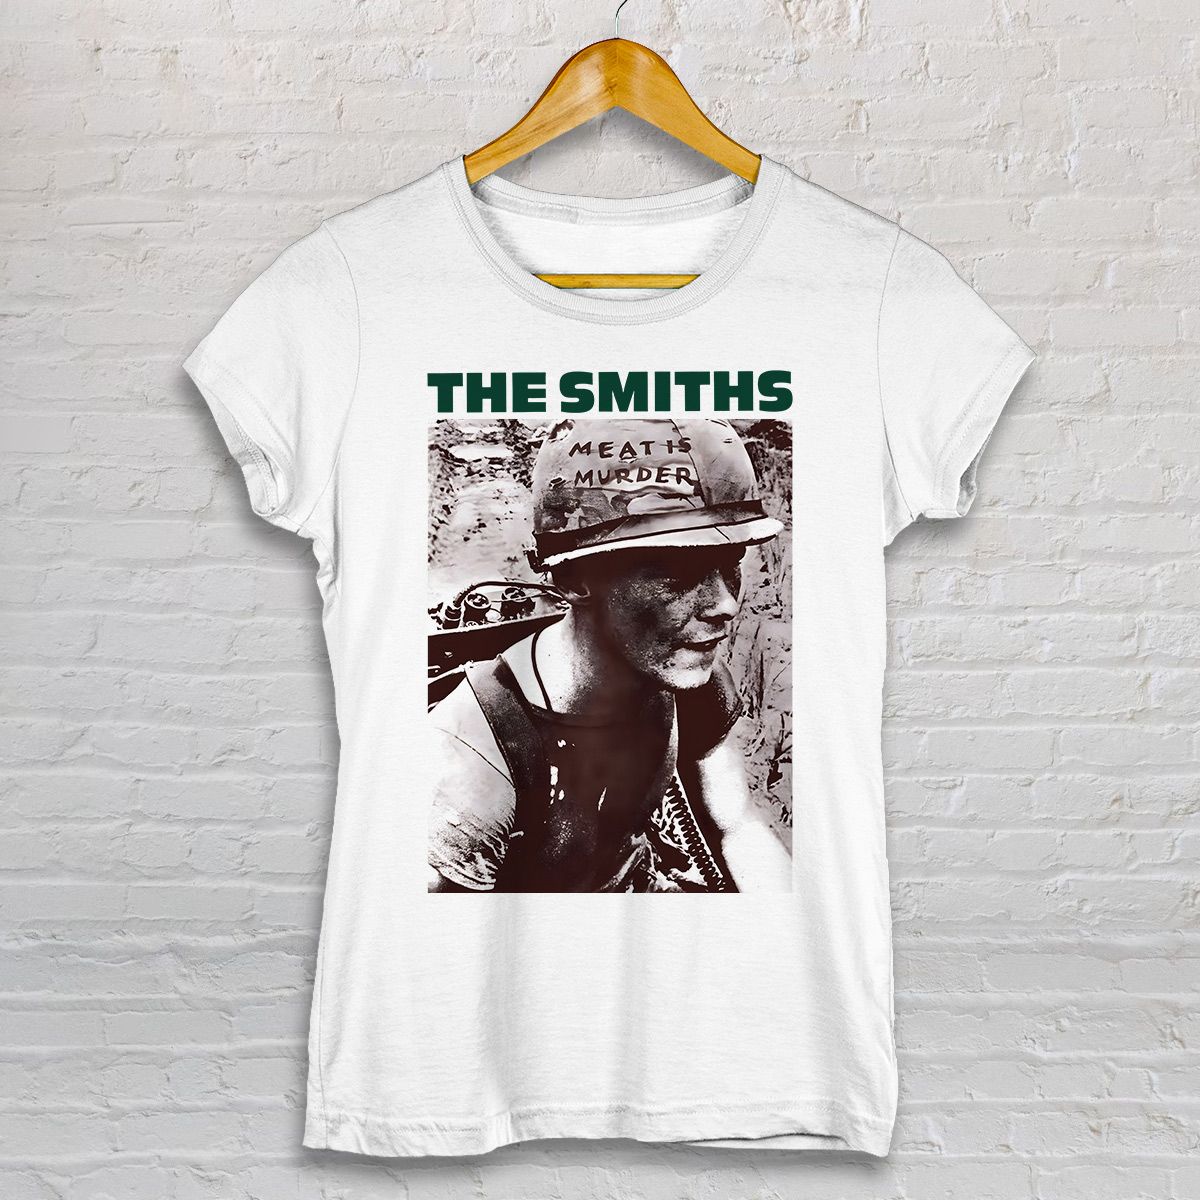 Nome do produto: BABY LOOK - THE SMITHS - MEAT IS MURDER